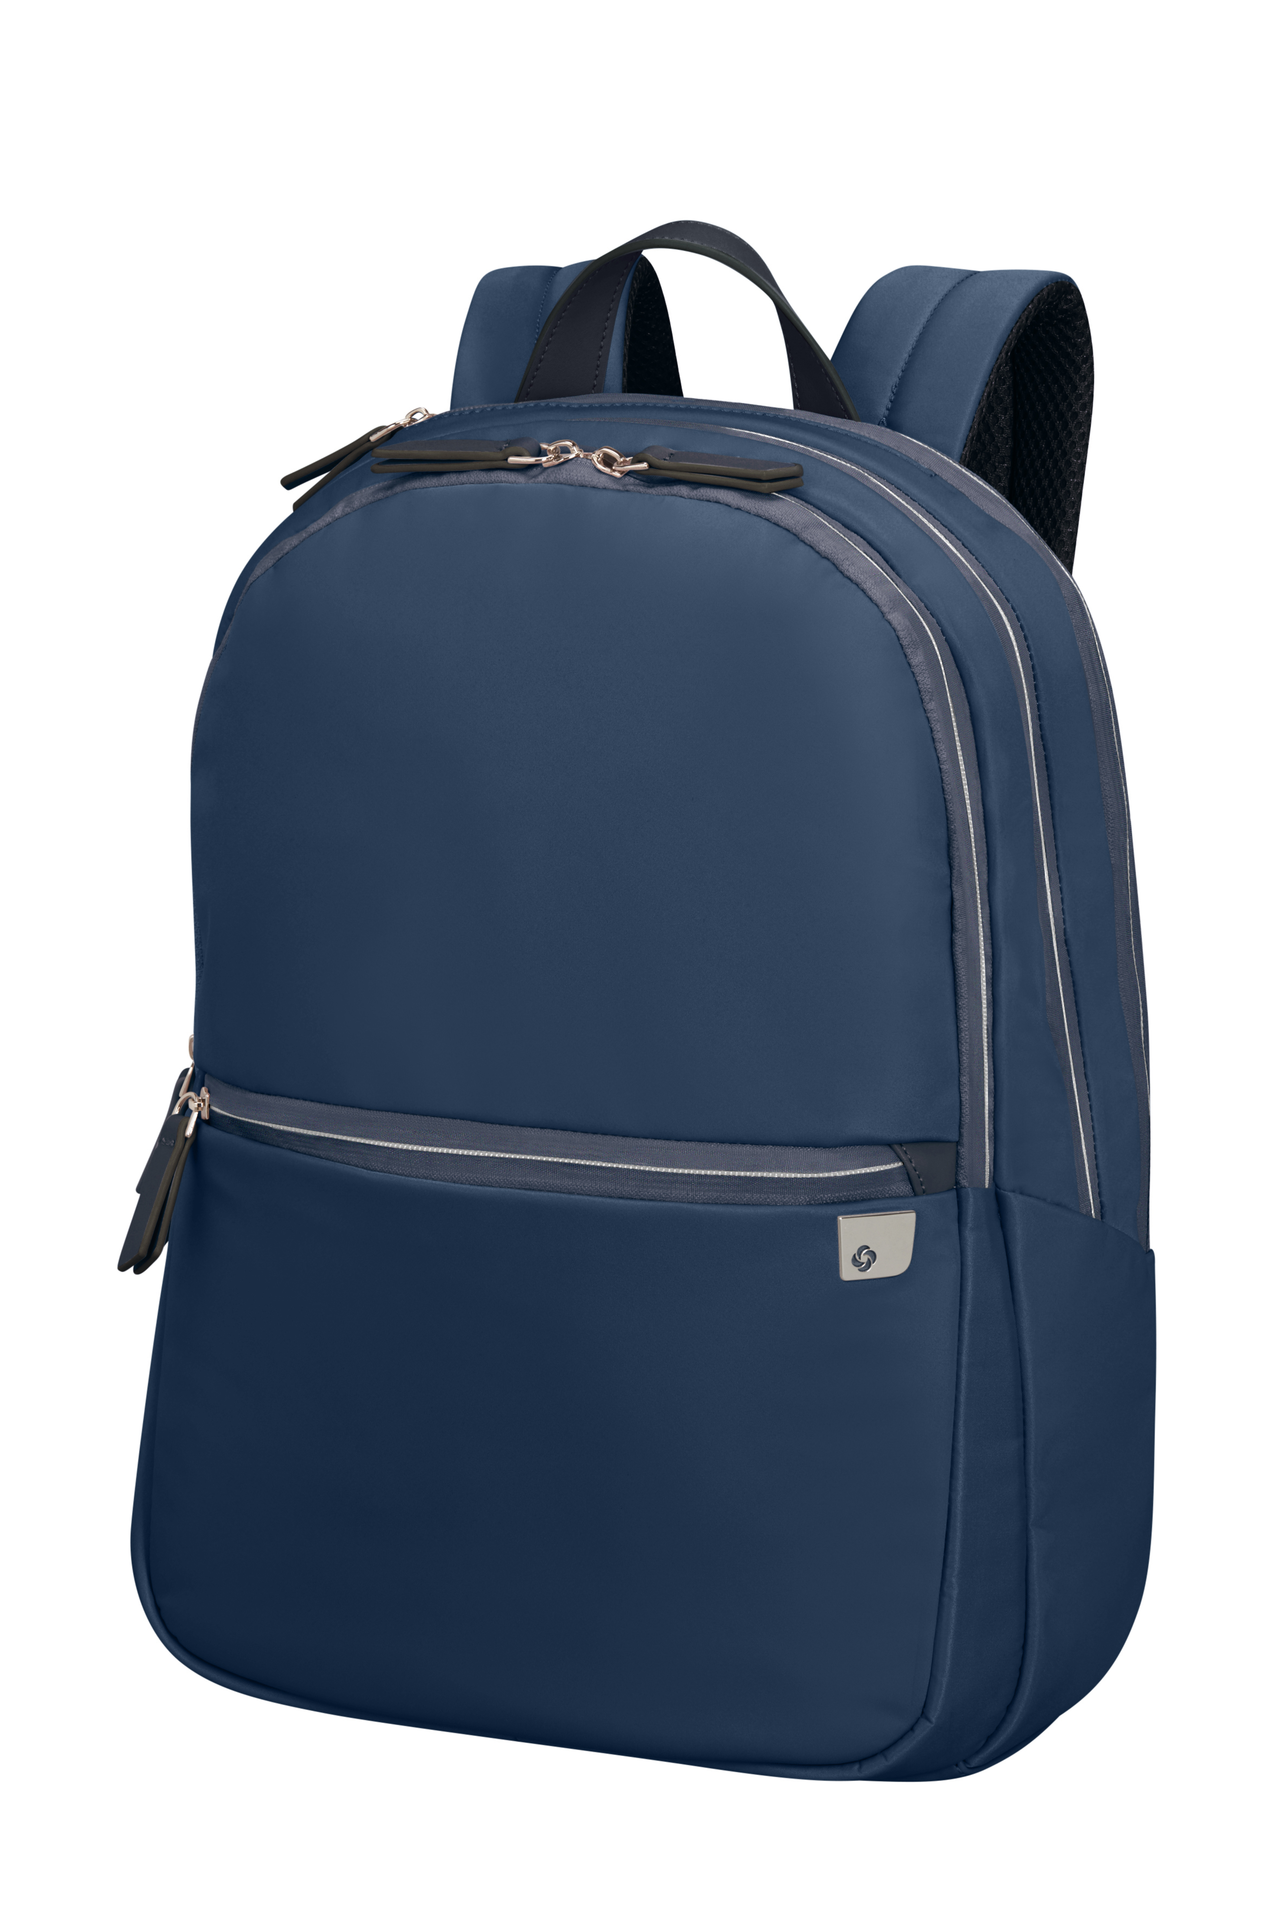 Samsonite Eco Wave Backpack 15.6 - Midn.Blue - Incredible Connection